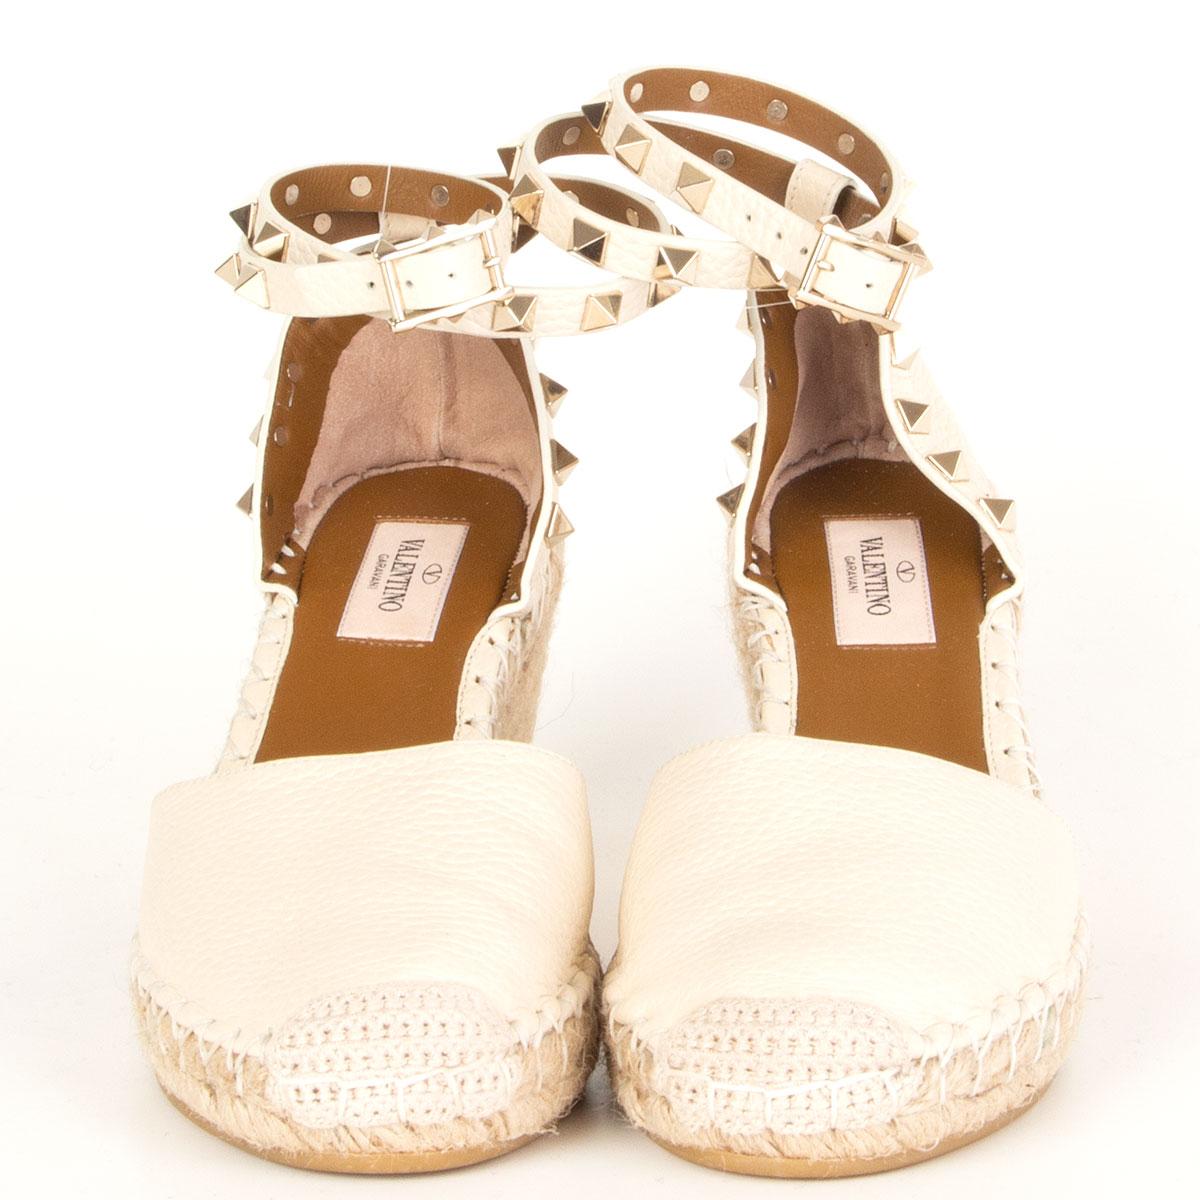 authentic Valentino Rockstud espadrille wedges in off-white textured-leather. Detailed with the brand's signature 'Rockstuds' along the double ankle strap. Have been worn once and are in virtually new condition. 

Imprinted Size 36
Shoe Size